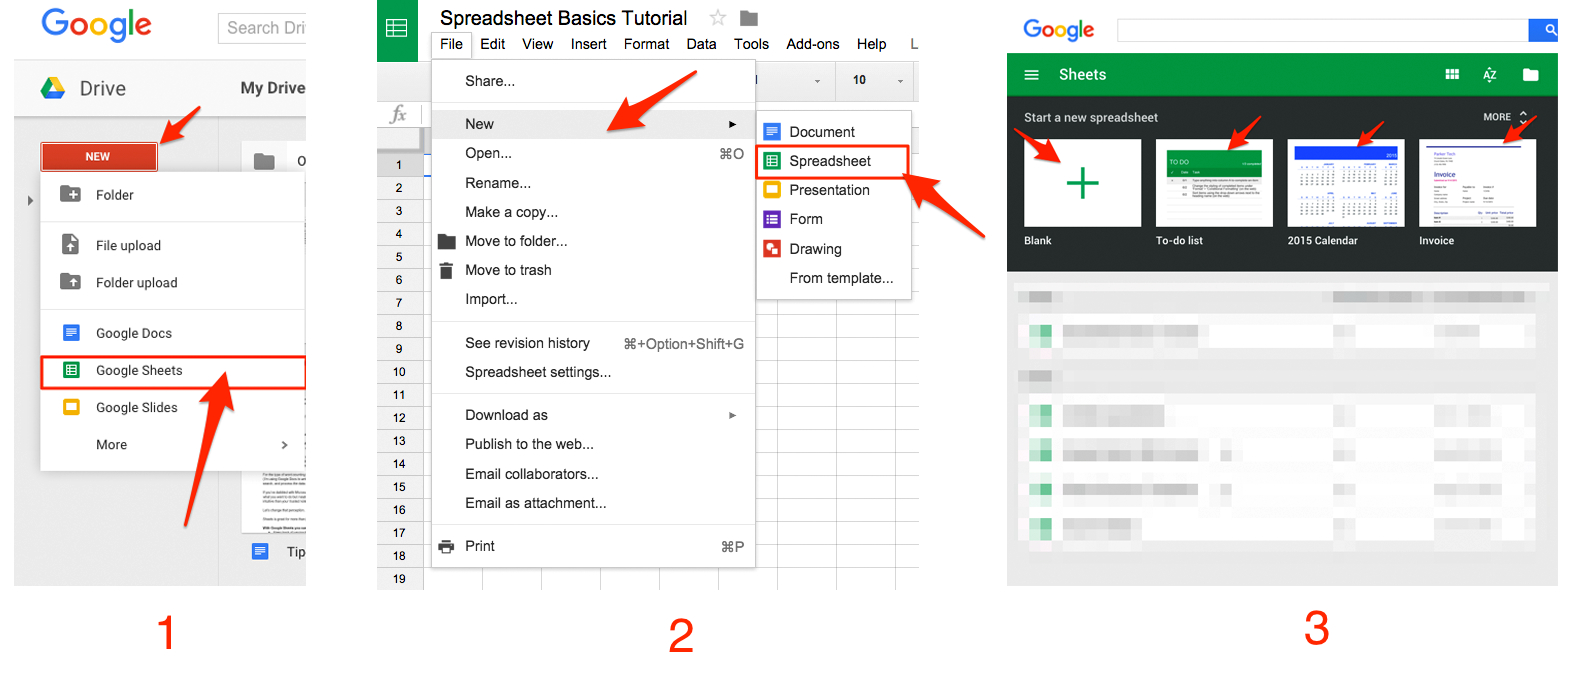 How To Build An Excel Spreadsheet Pertaining To Google Sheets 101: The Beginner's Guide To Online Spreadsheets  The